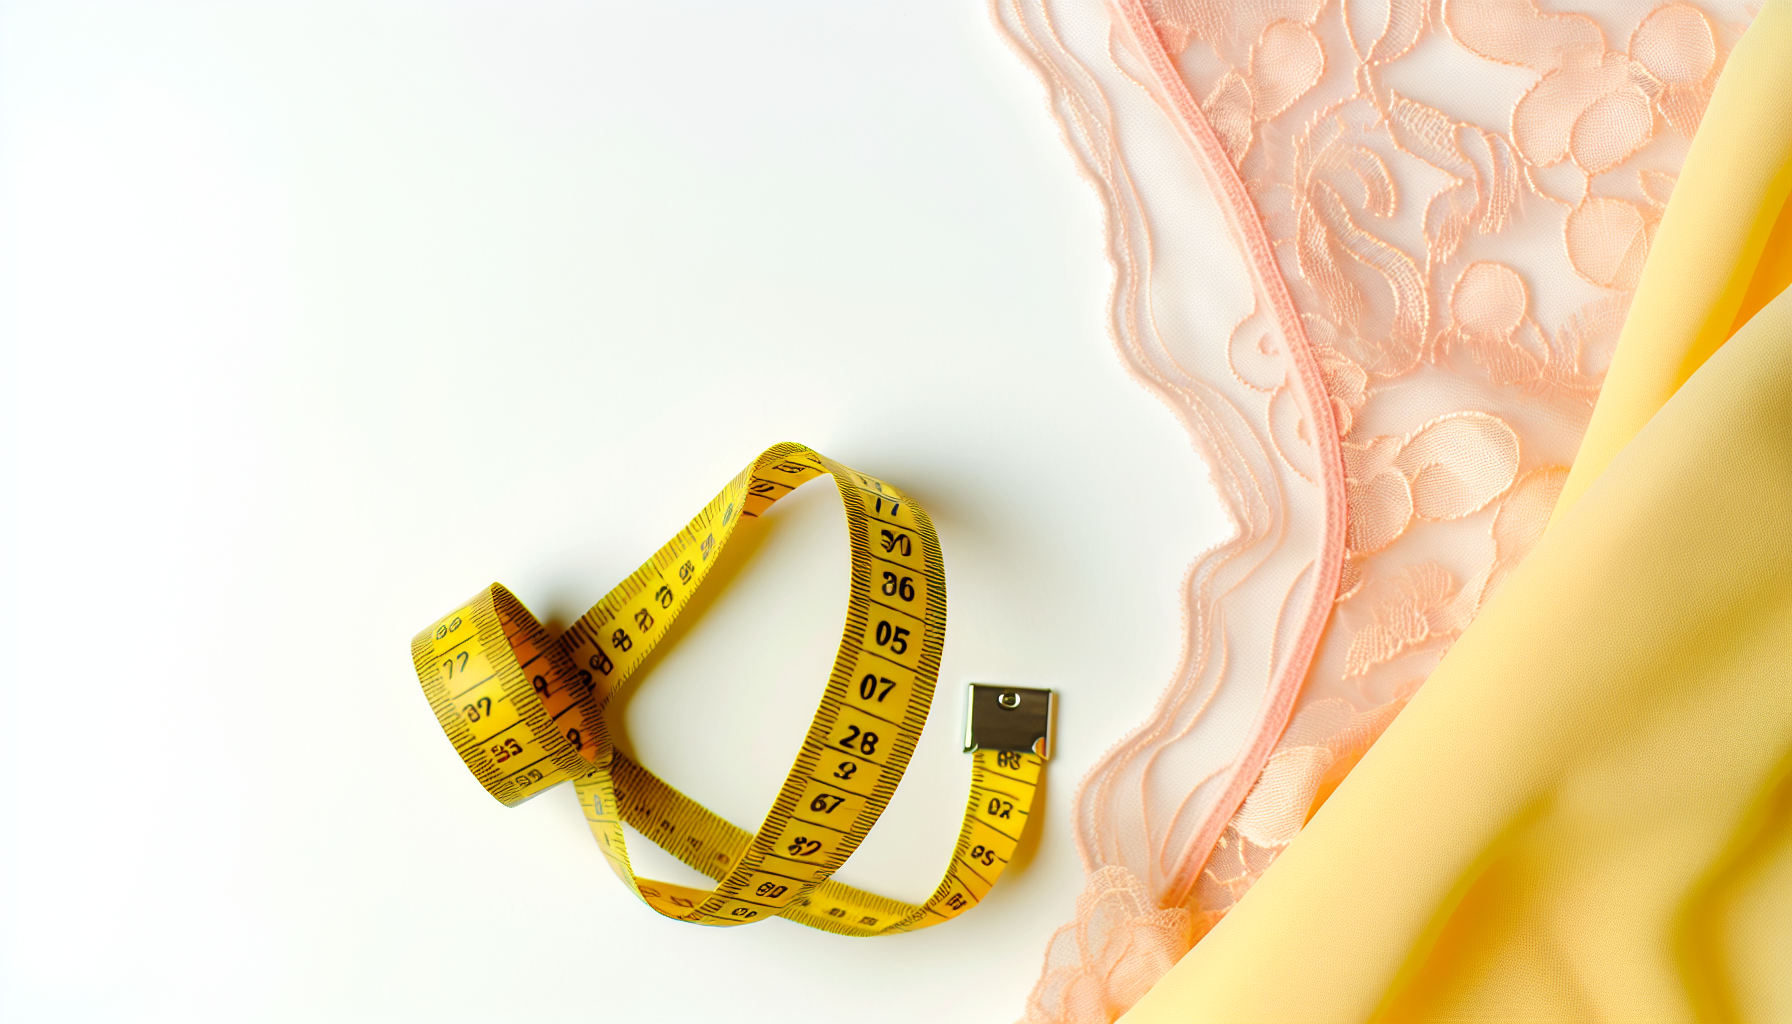 Photo of measuring tape and lingerie